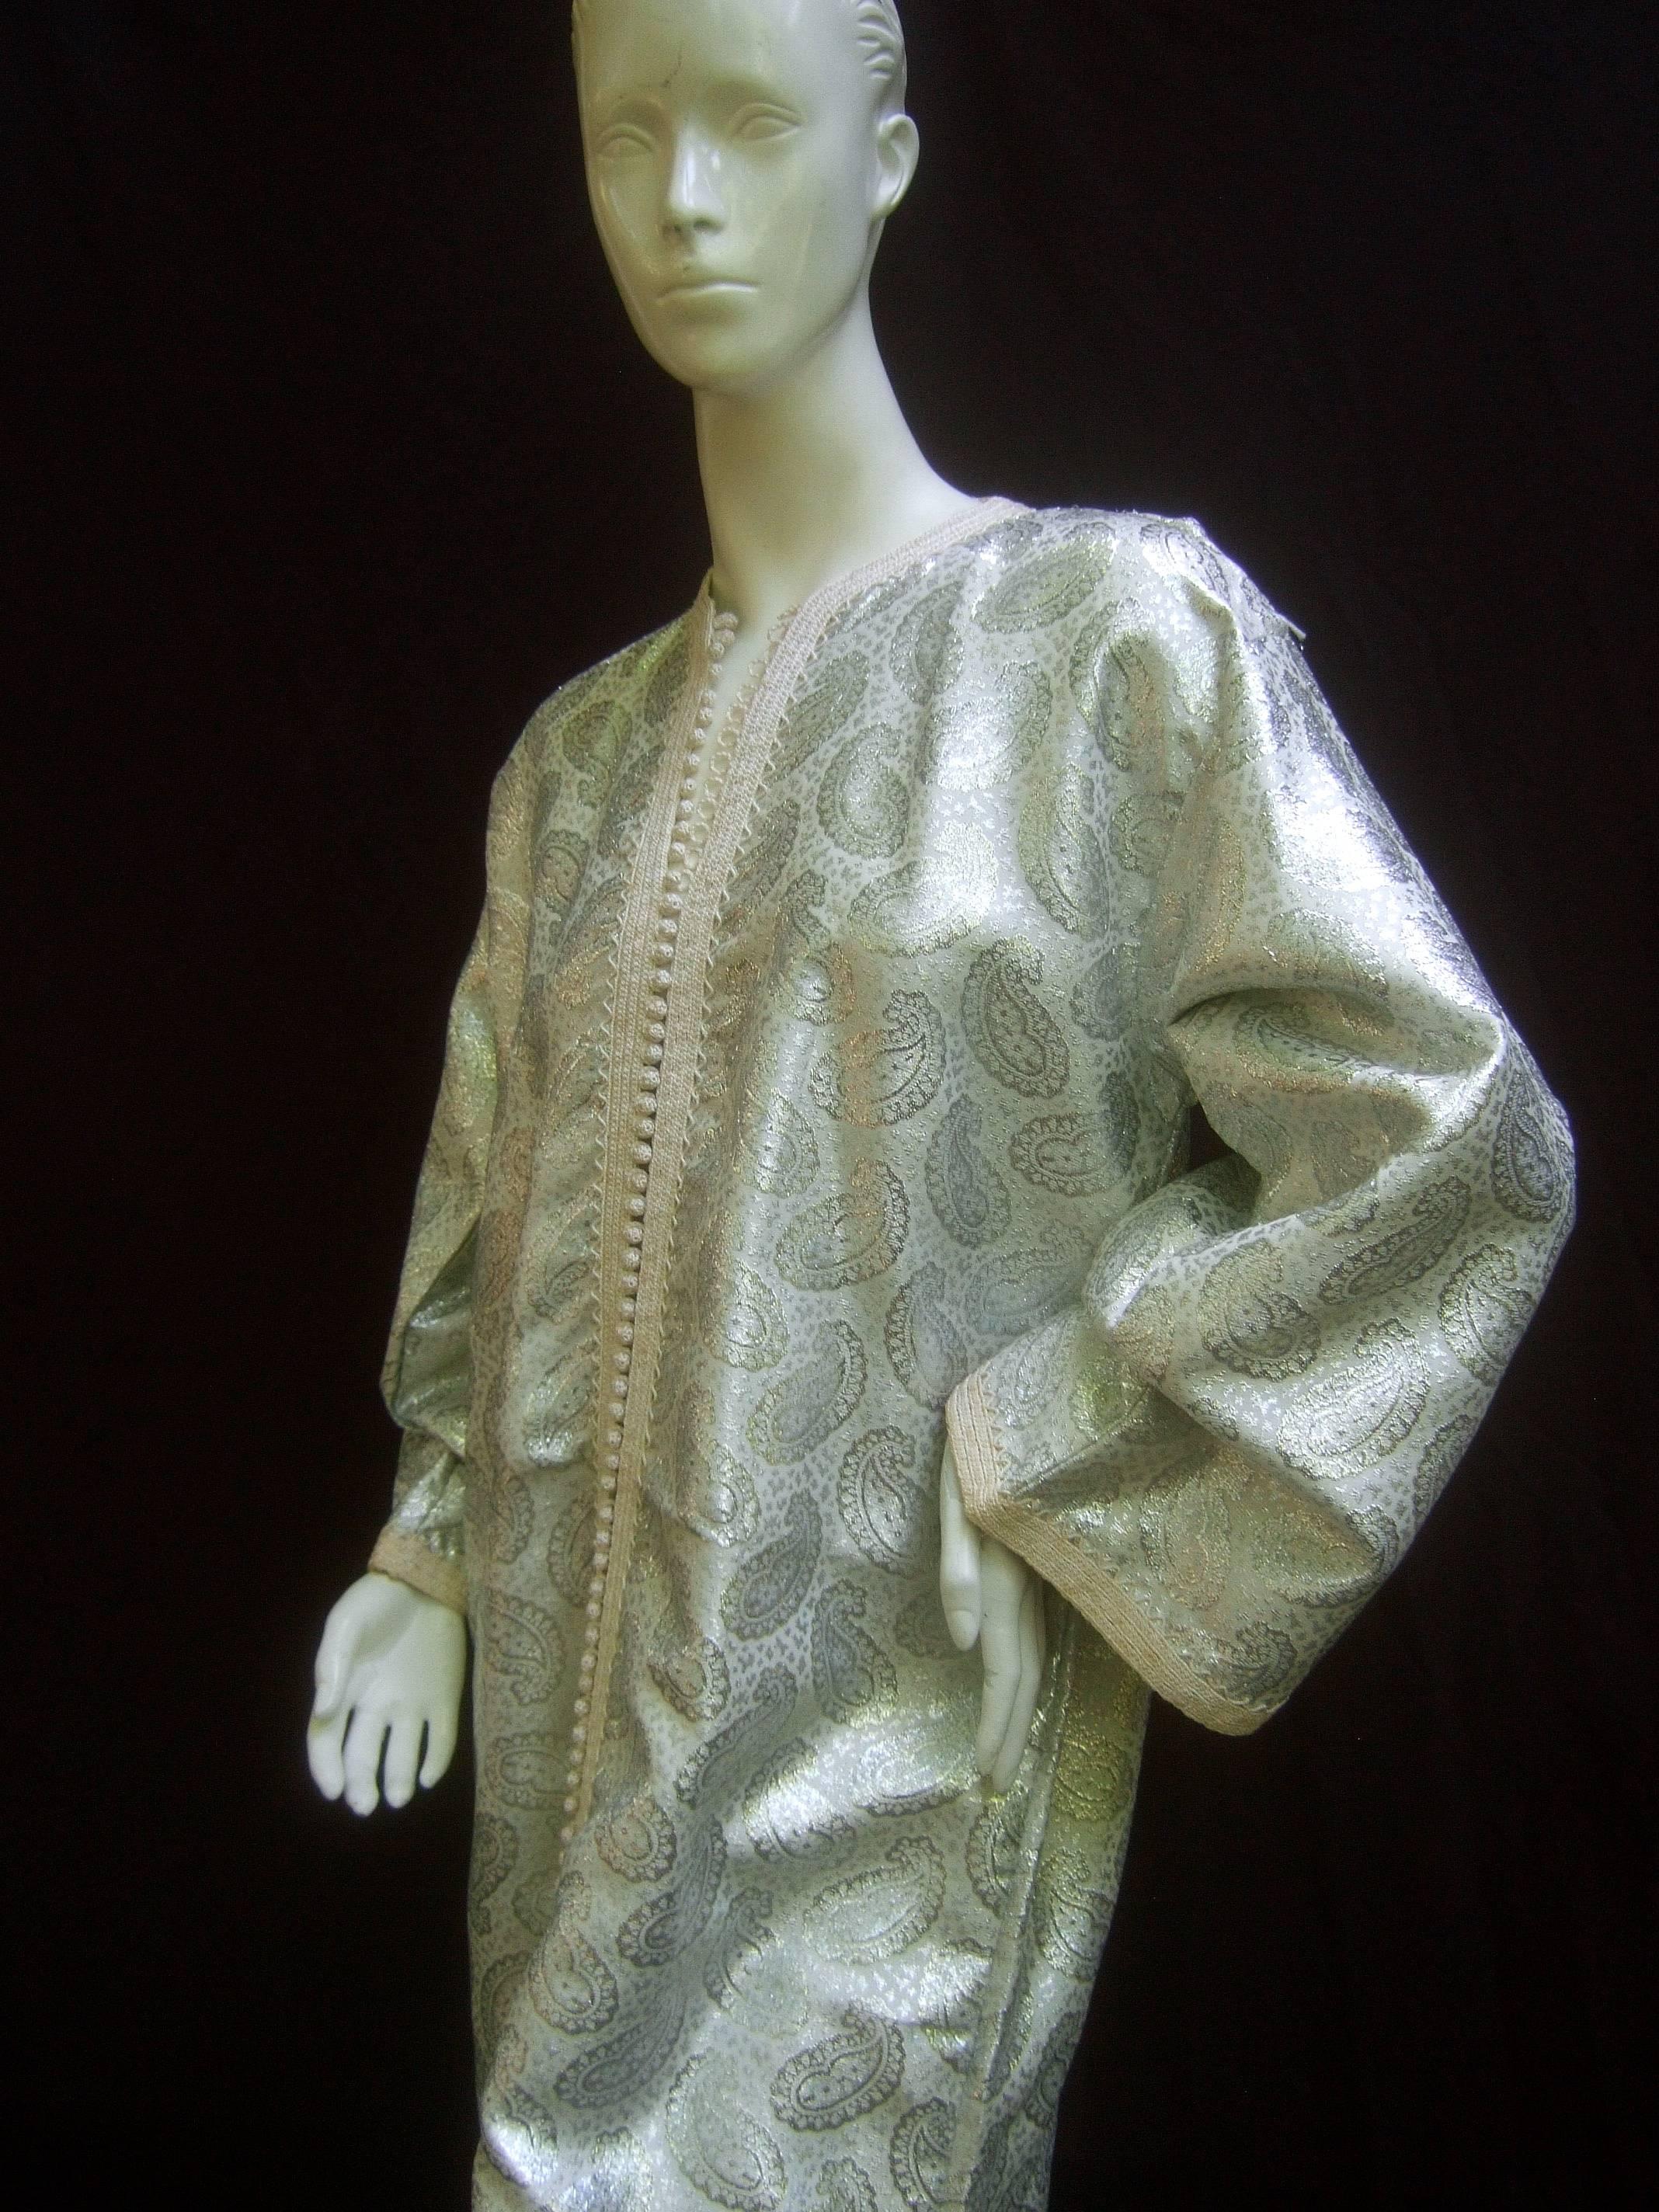 Women's Exotic 1970s Silver Metallic Caftan Gown for Saks Fifth Avenue 